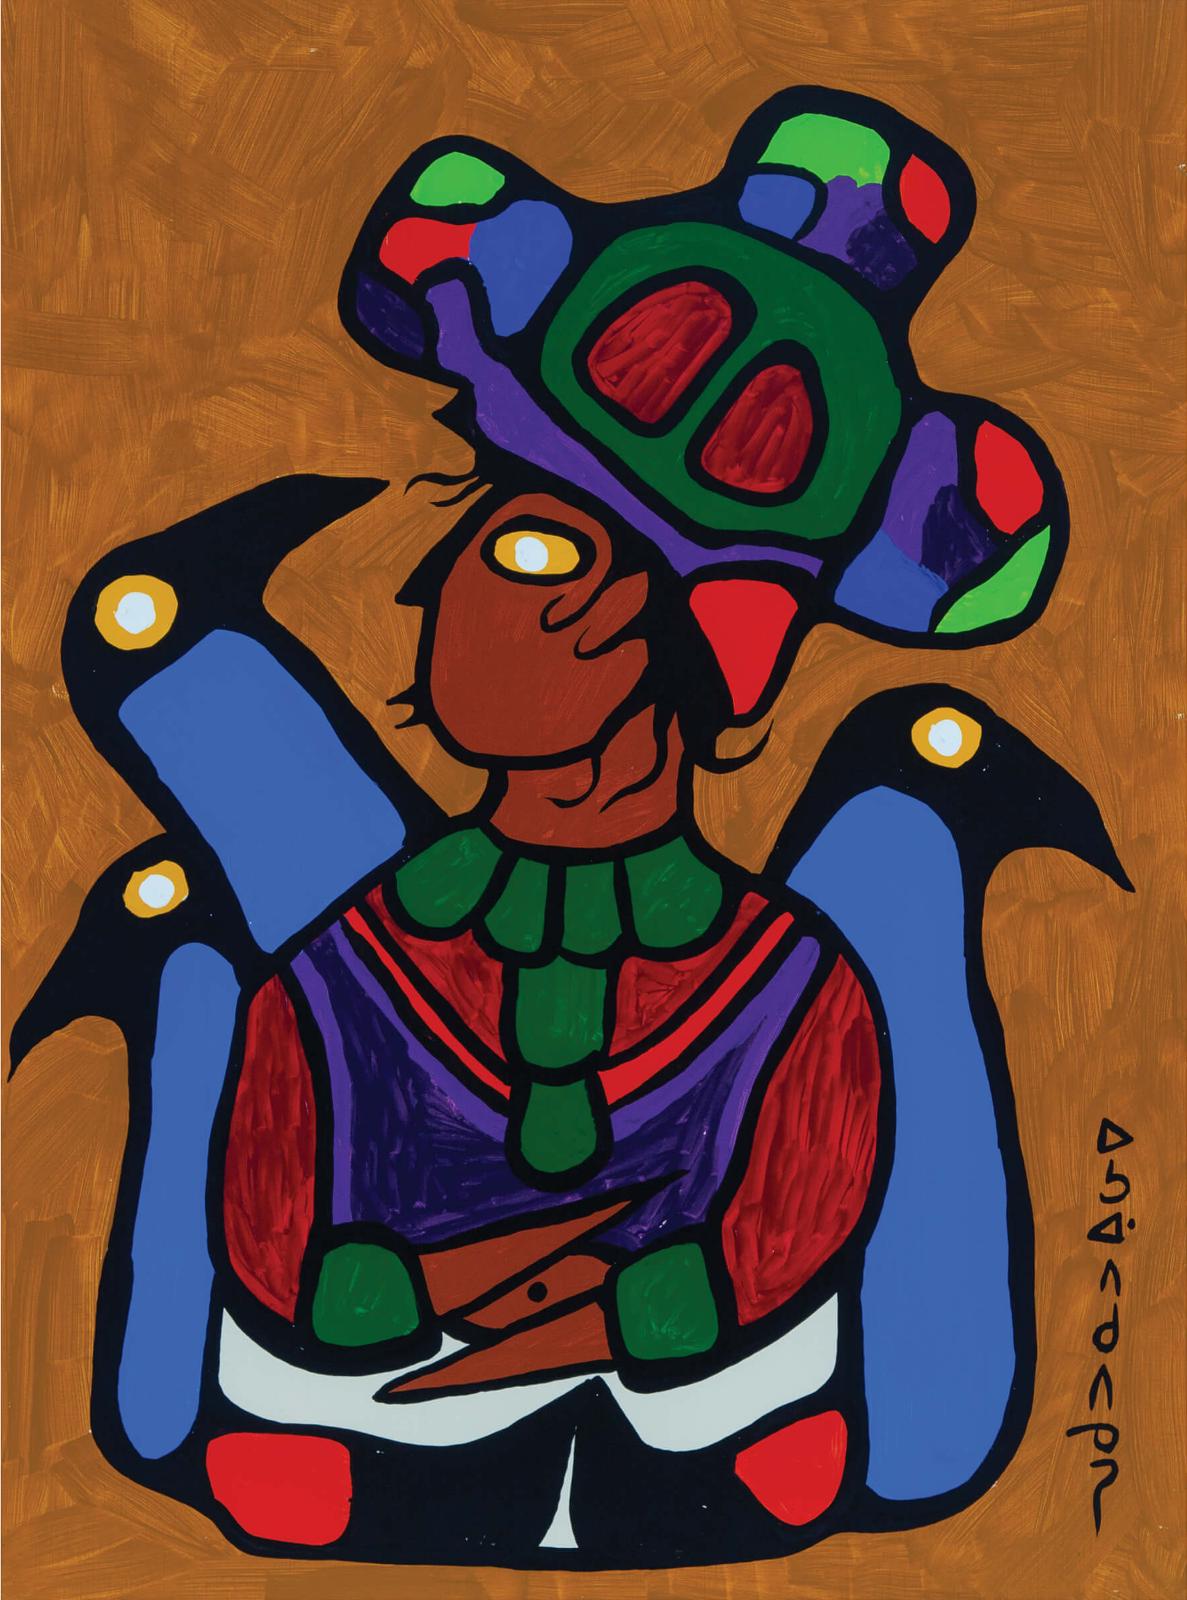 Norval H. Morrisseau (1931-2007) - Child With Birds, 1972